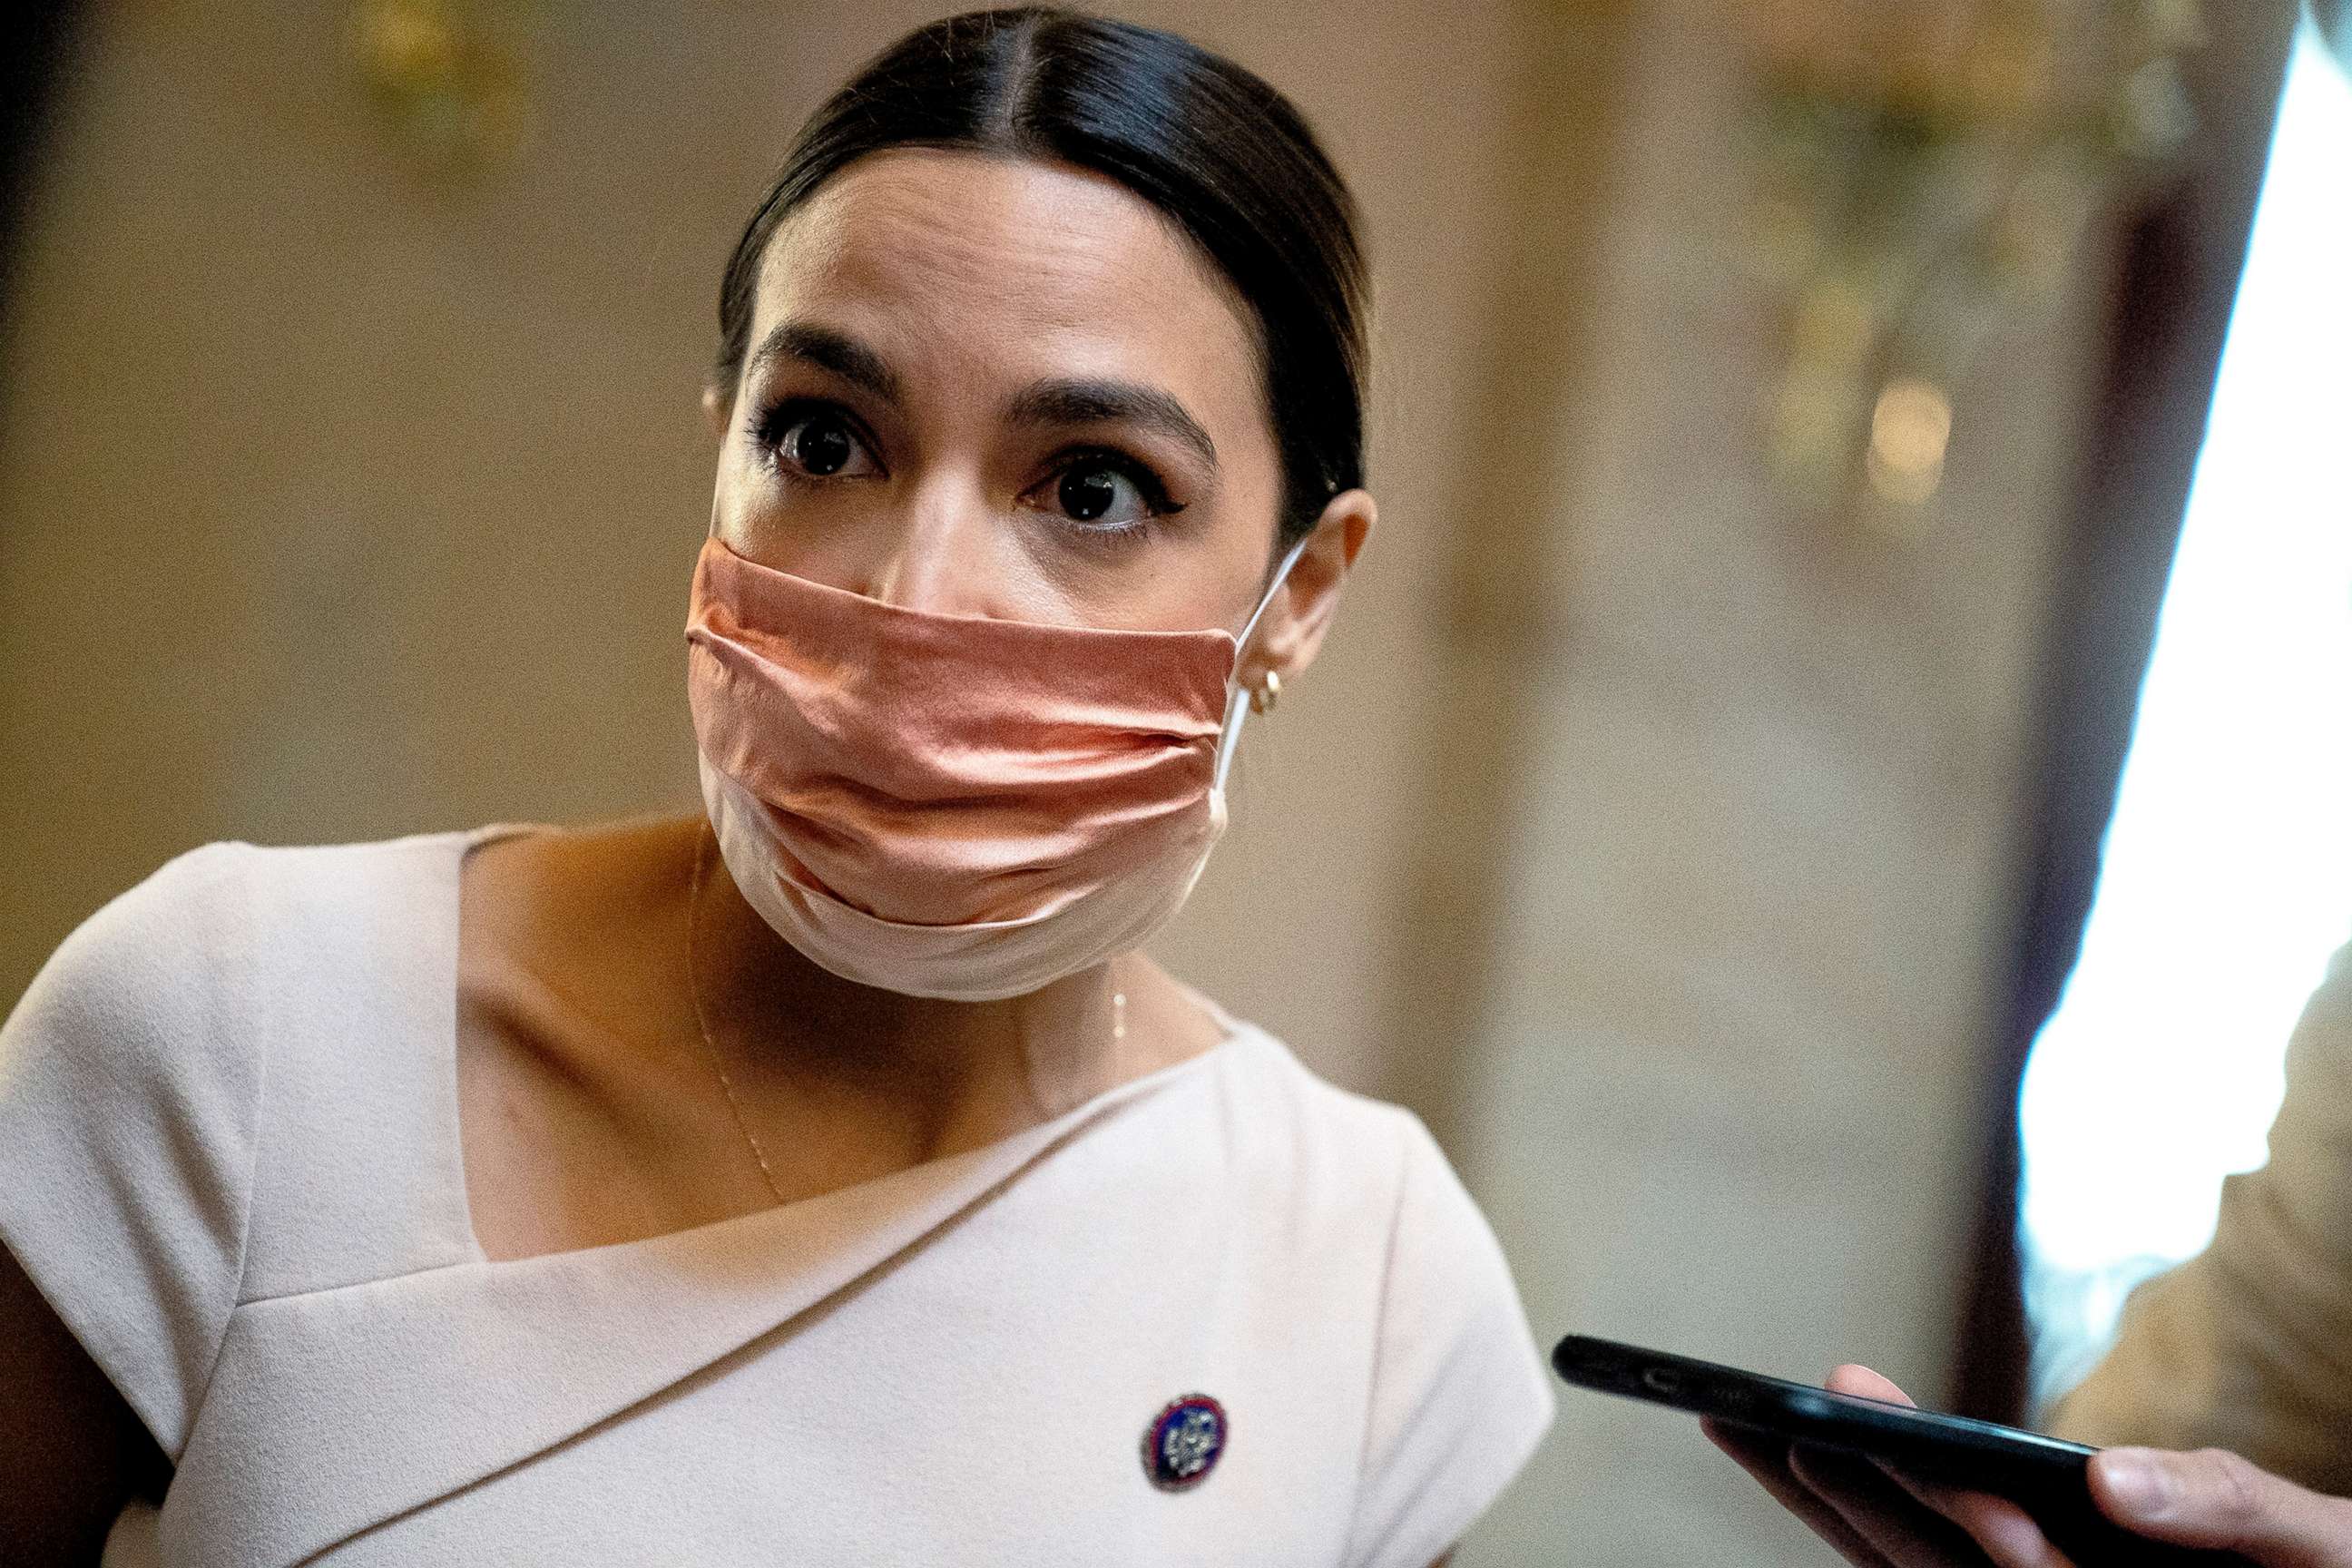 PHOTO: Rep. Alexandria Ocasio-Cortez (D-N.Y.) speaks to reporters at the US Capitol in Washington, D.C., May 13, 2021.